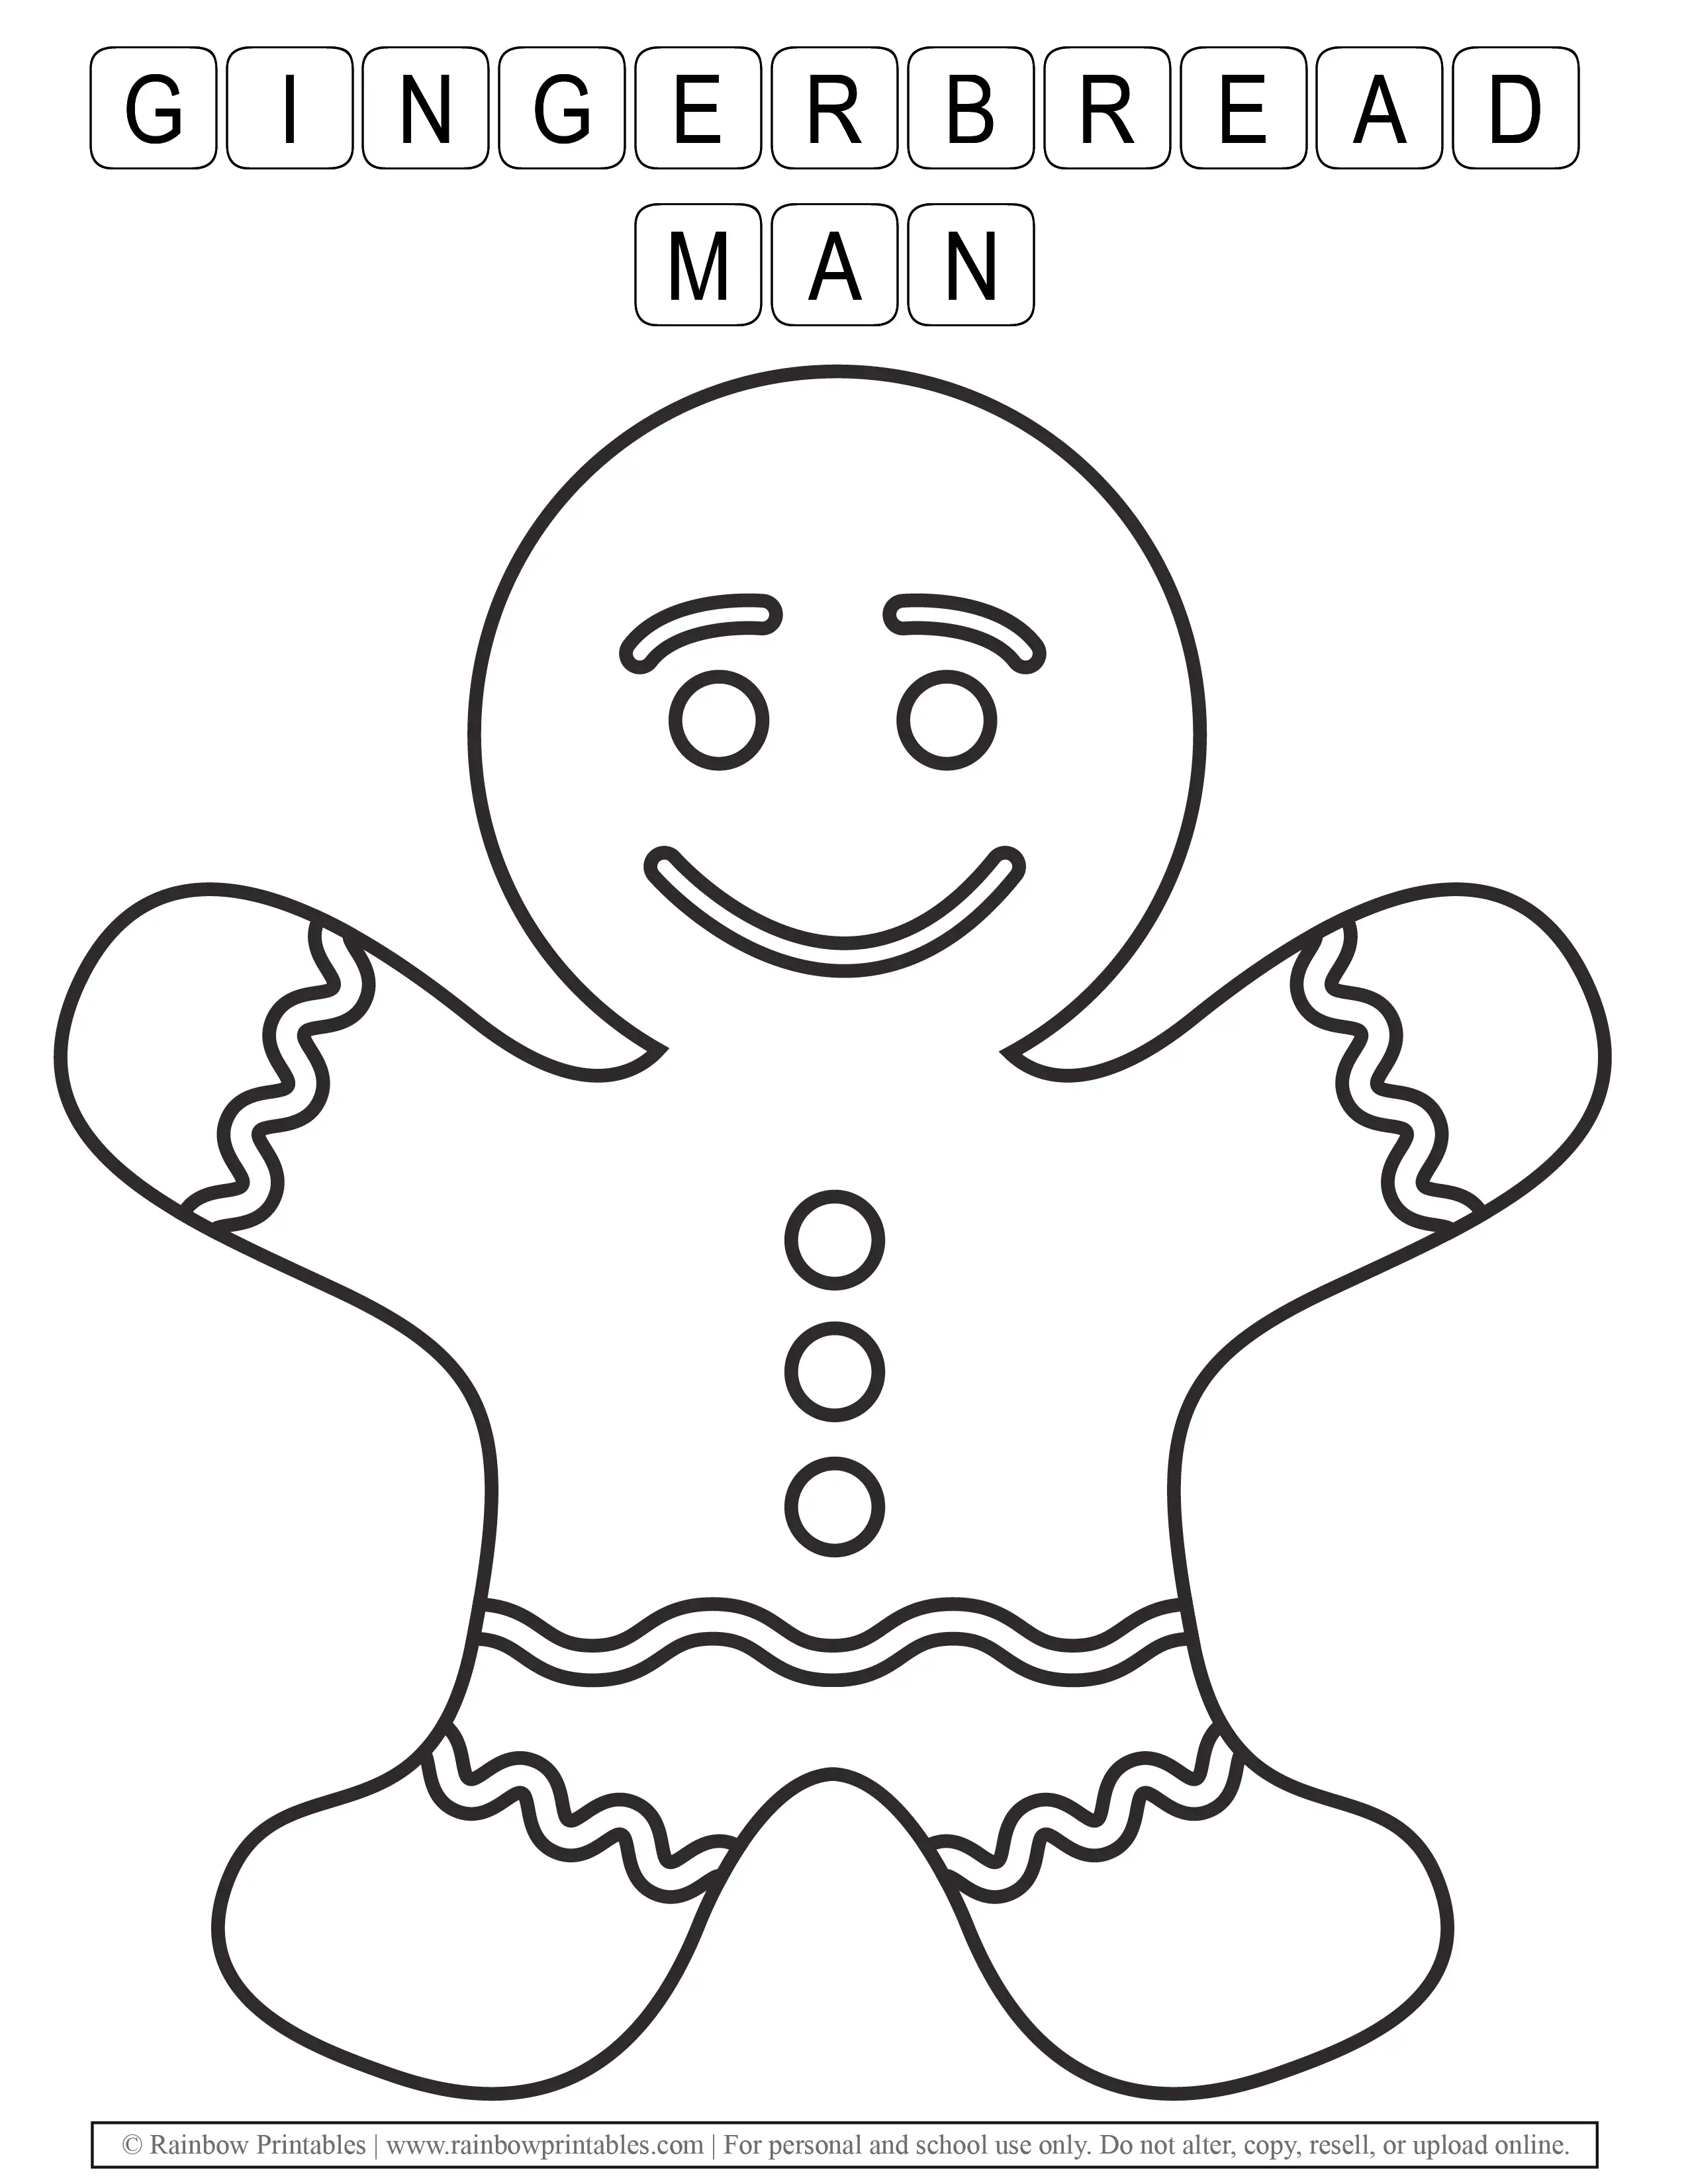 Cute Gingerbread Man Outline Arts Craft for Kids Christmas Holiday Blank Ginger Bread Guy Coloring Pages